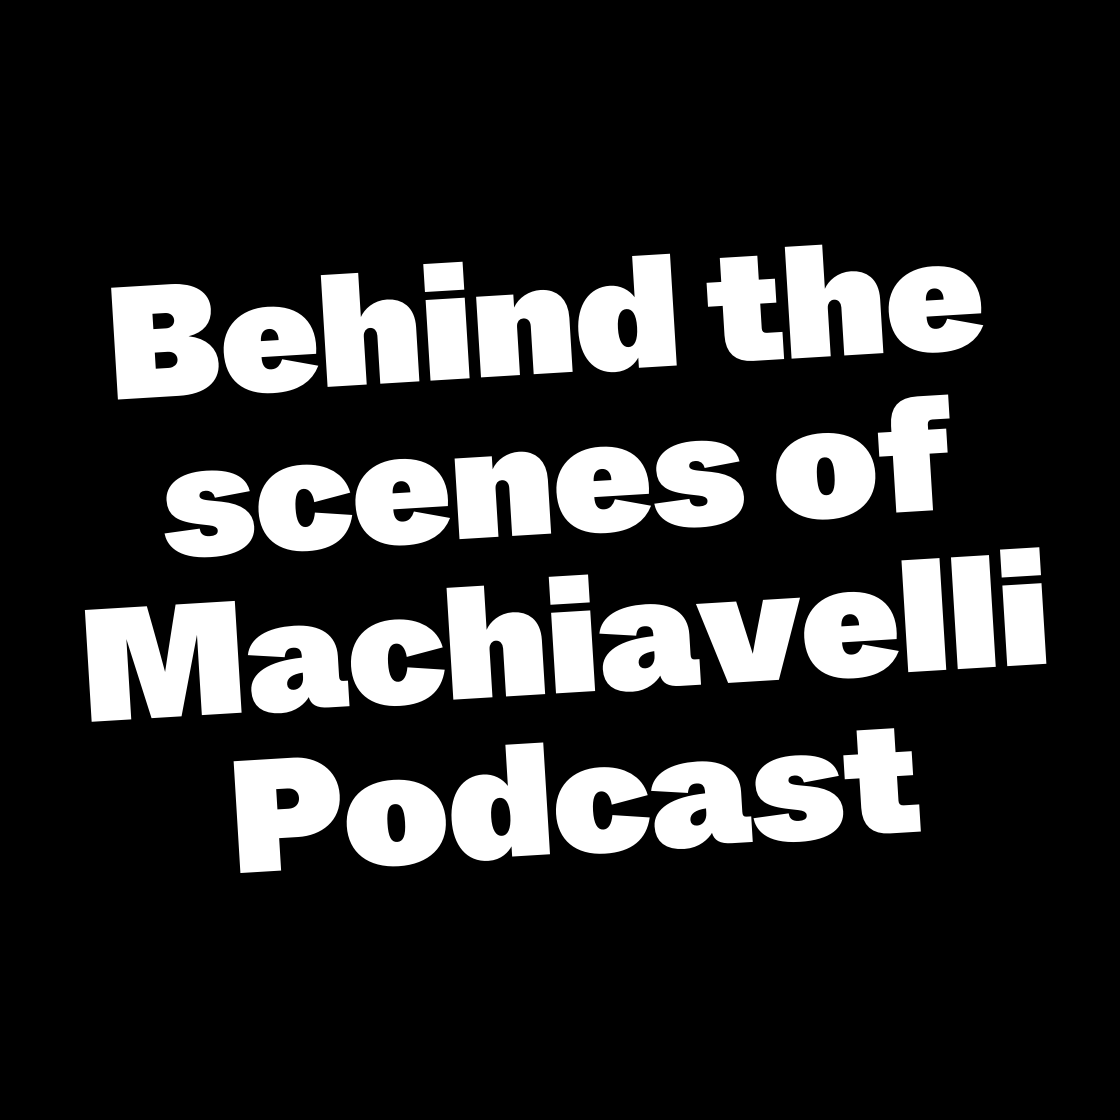 Behind the scenes of Machiavelli Podcast (TINCON)